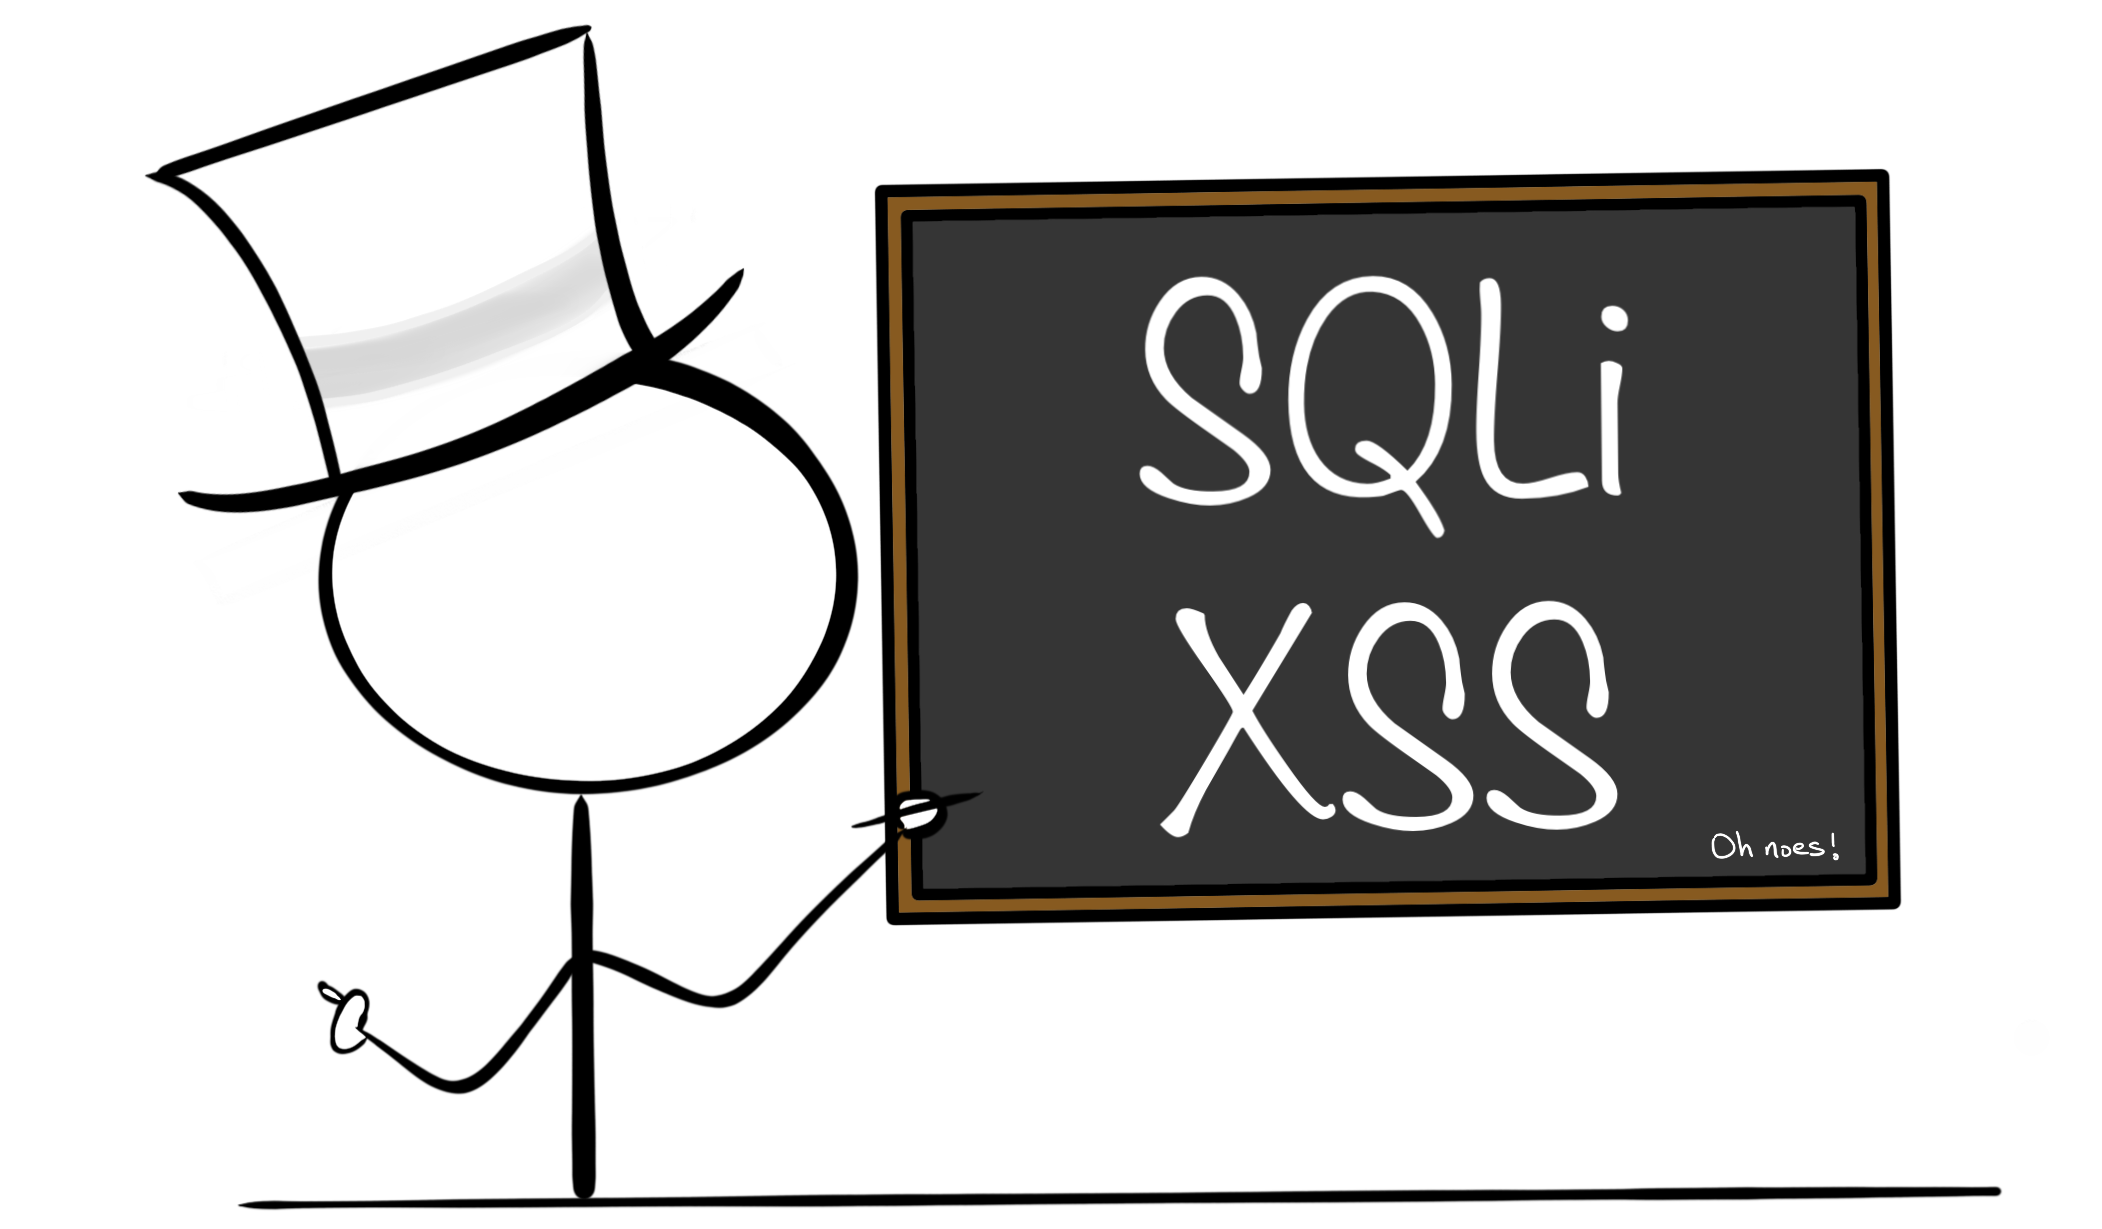 The architecture of XSS attack